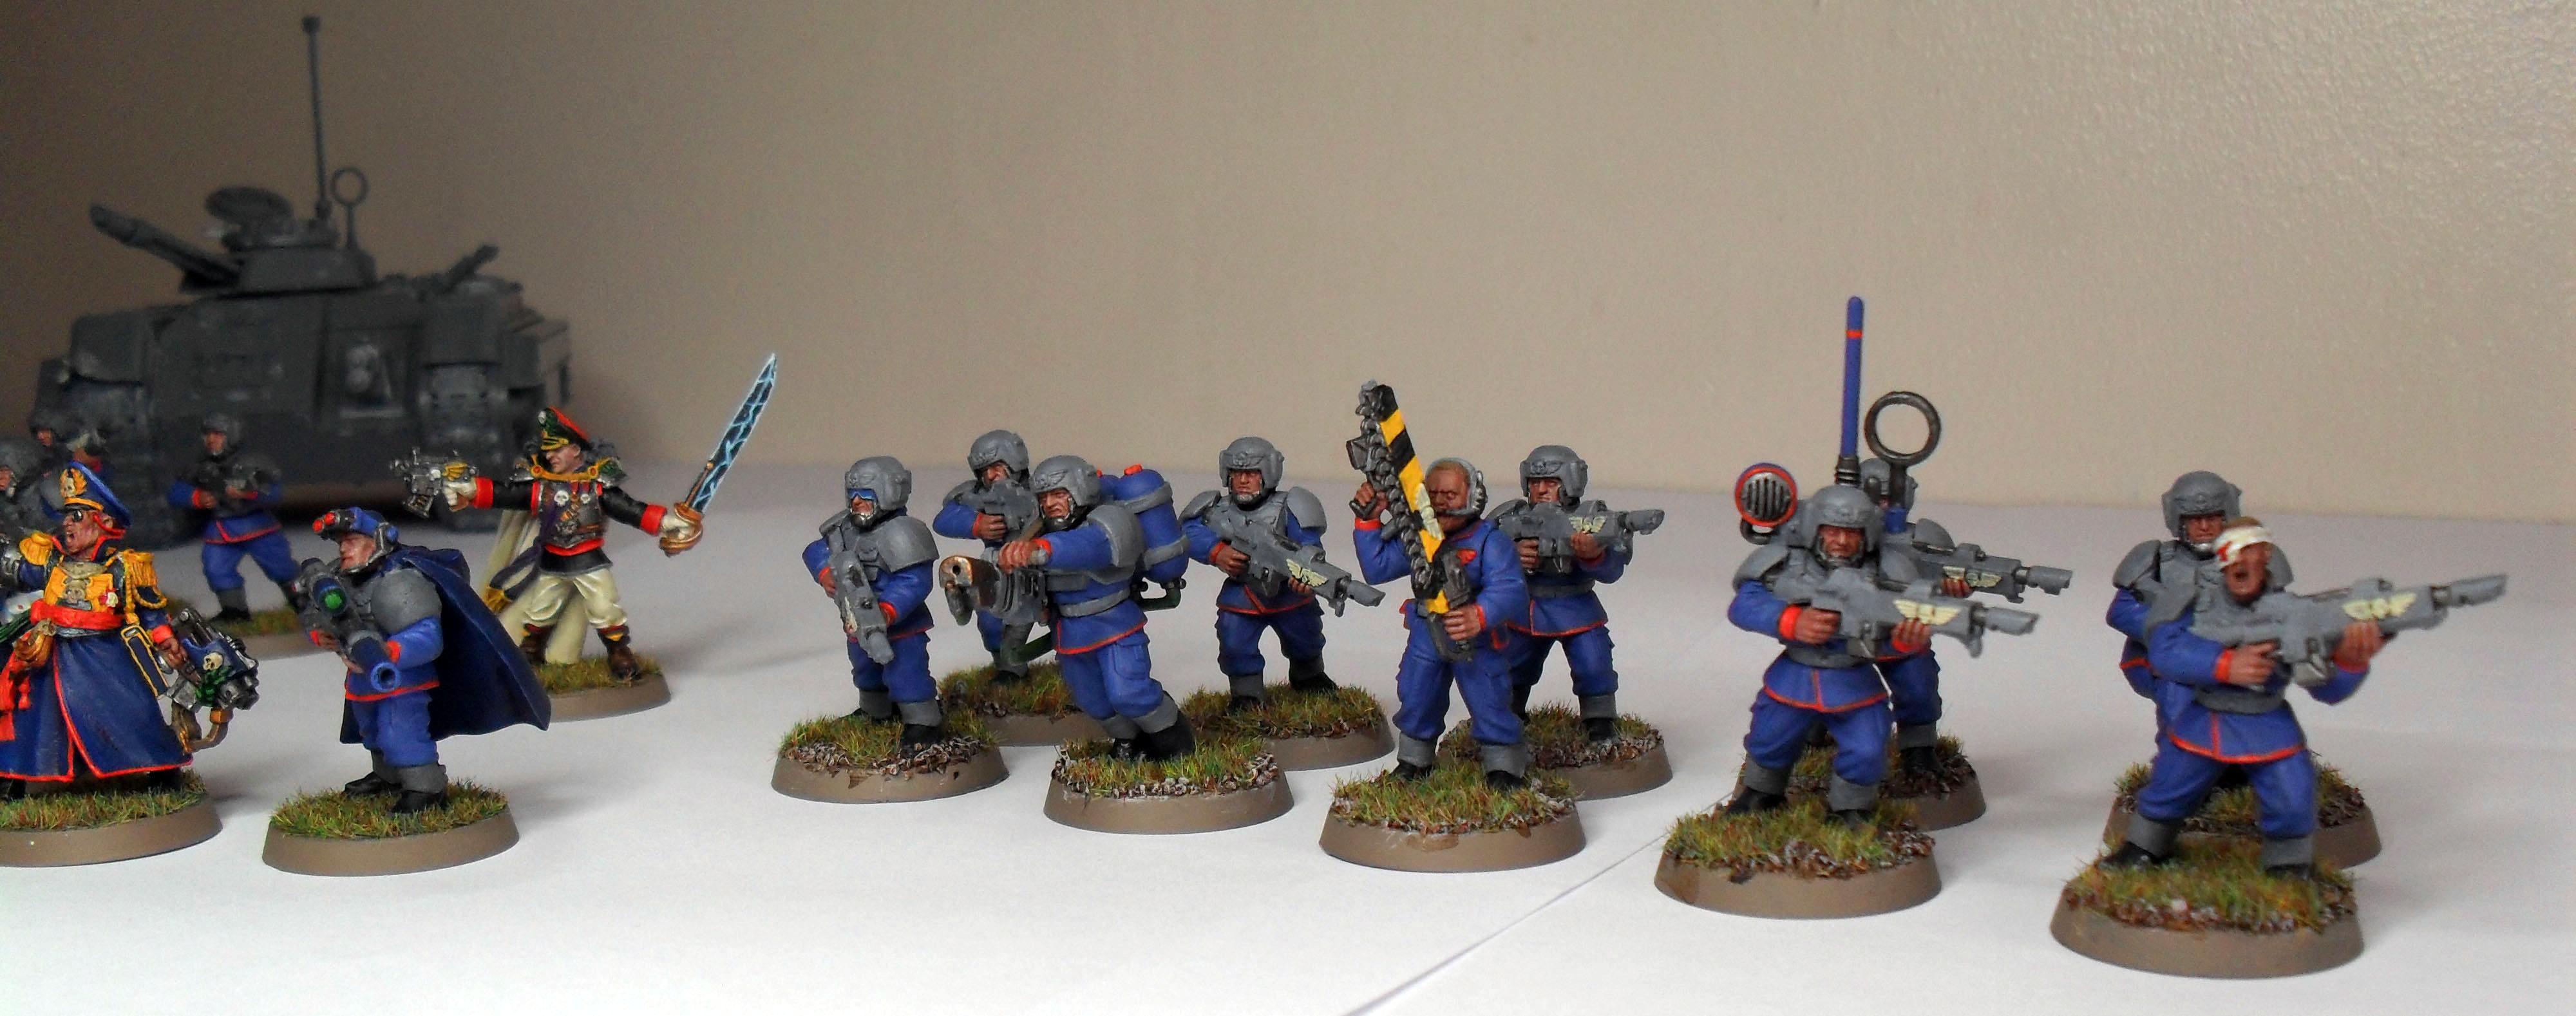 Imperial Guard, Mordian